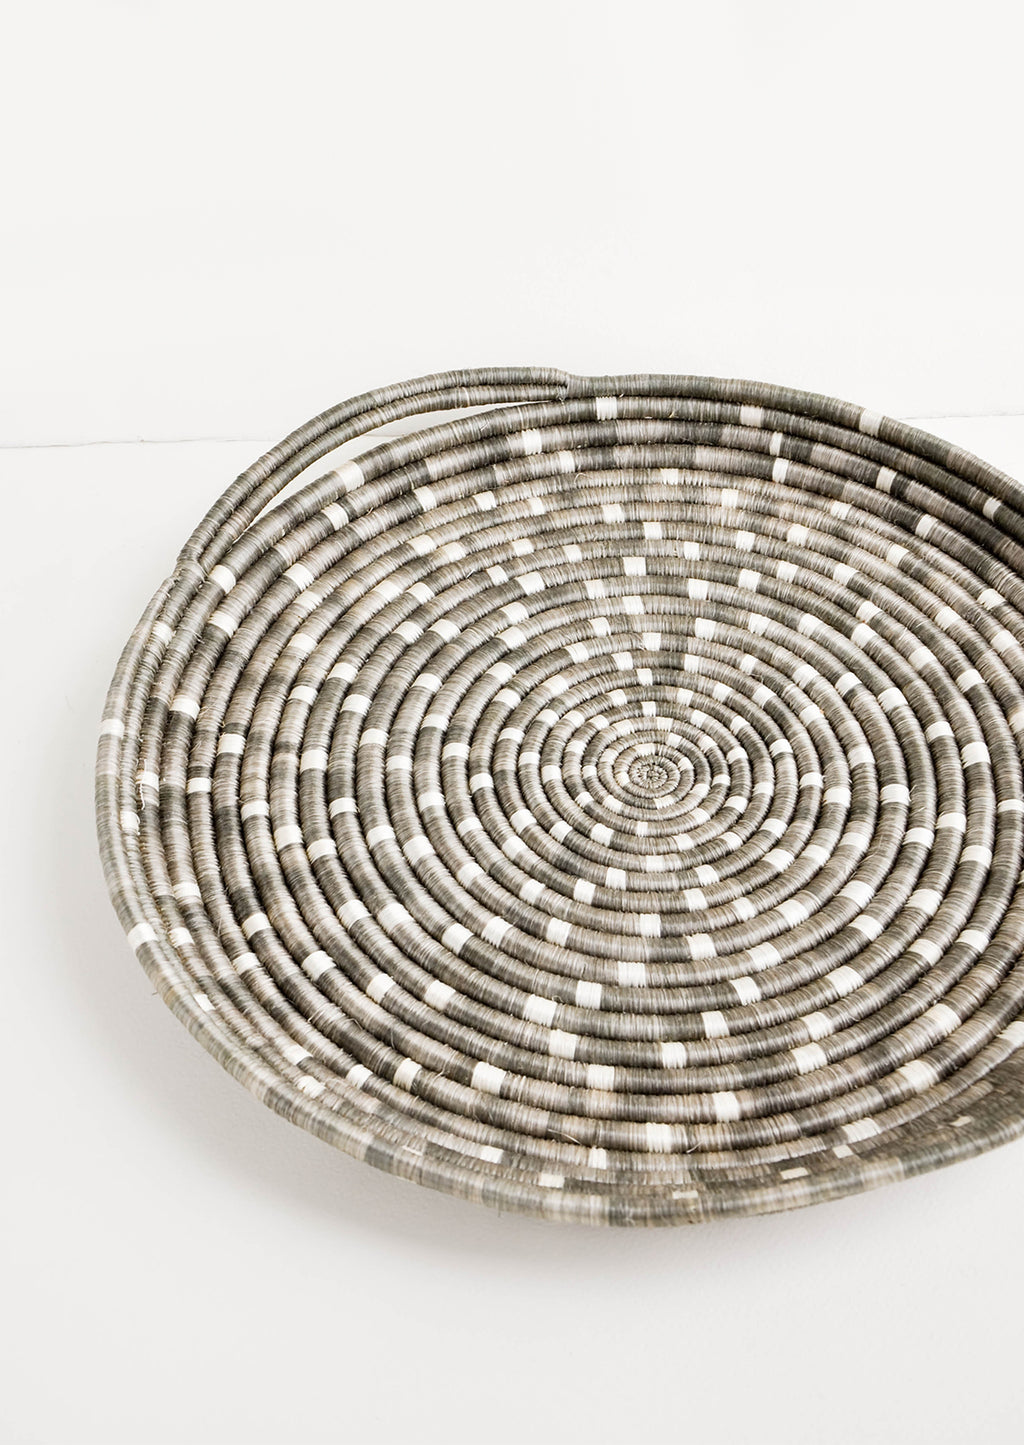 Taupe: Speckled Sweetgrass Serving Tray in Taupe - LEIF